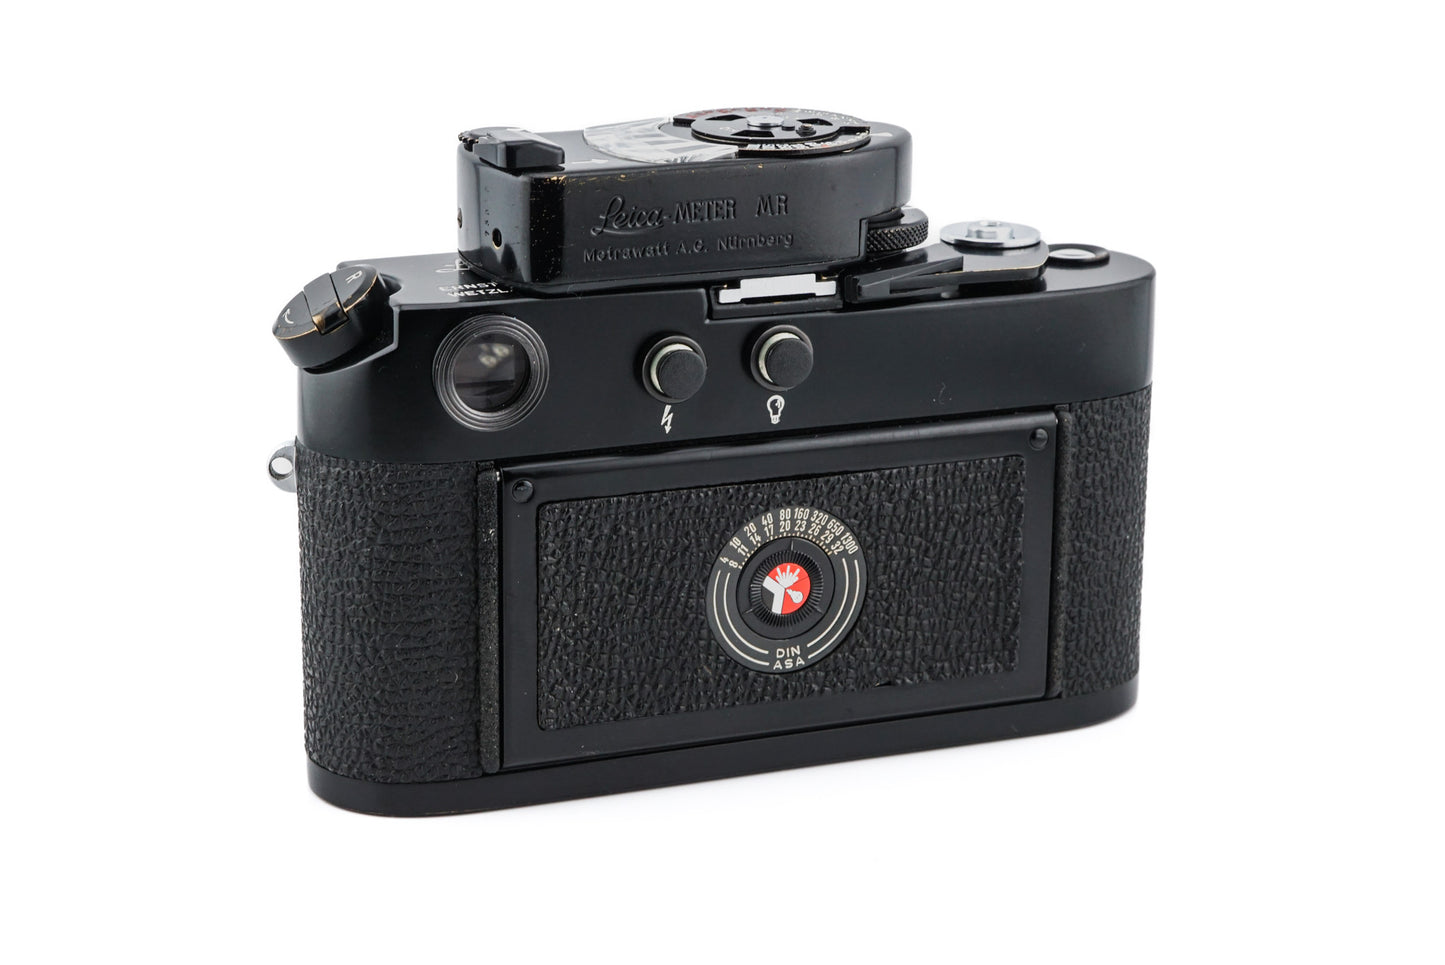 Back view of first batch black paint Leica M4 showing brassed rewind knob, iso dial, and flash symbols